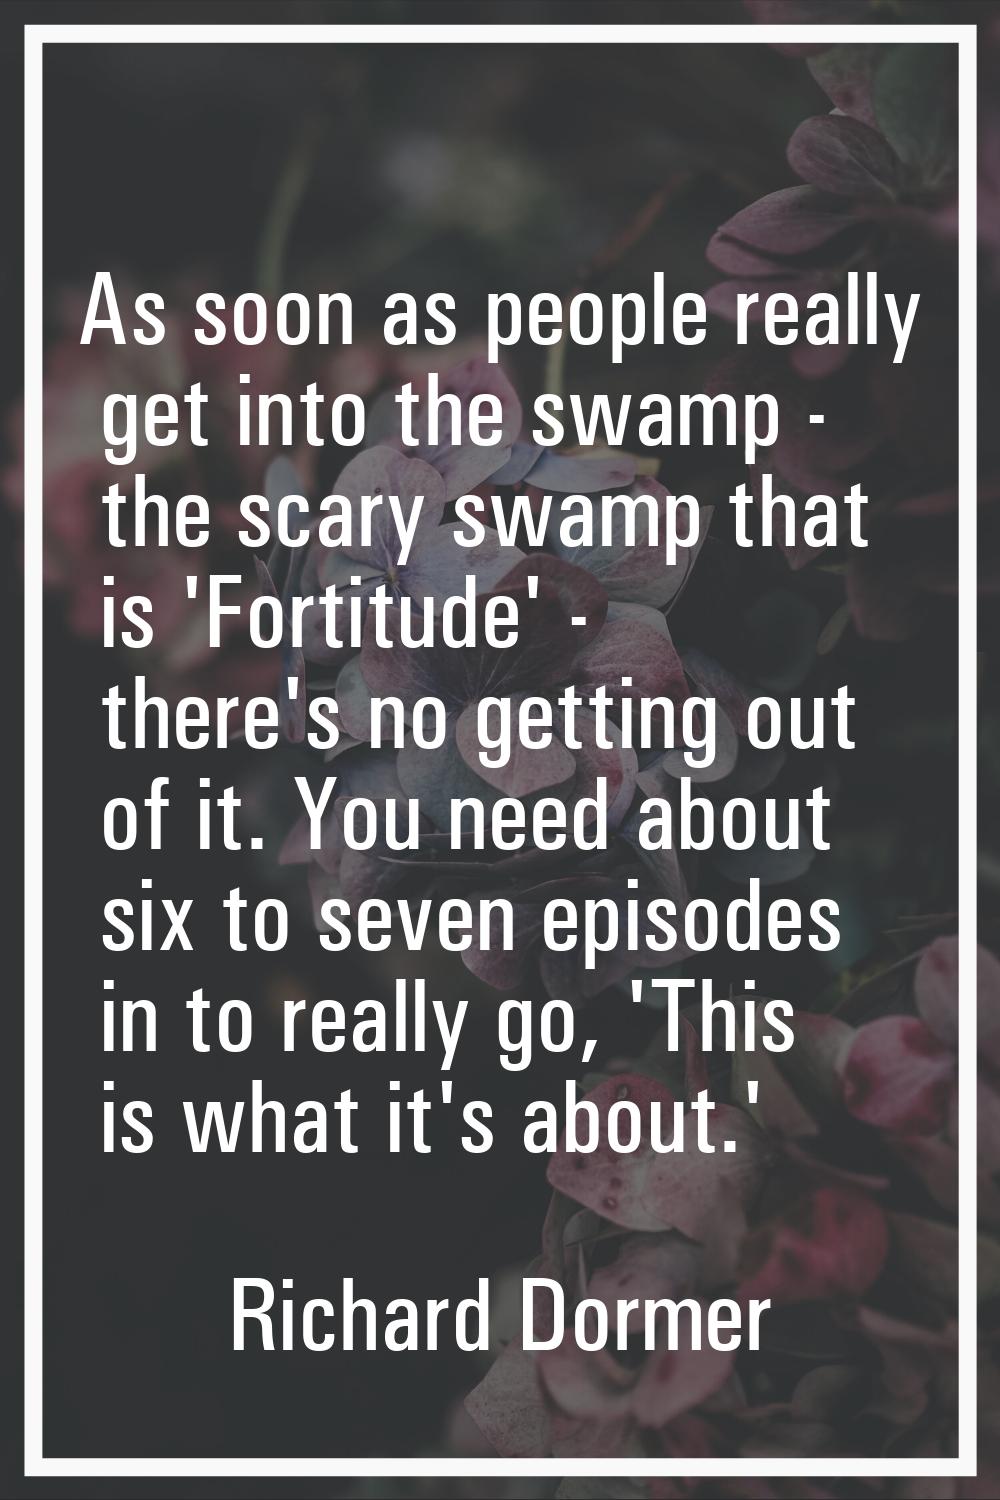 As soon as people really get into the swamp - the scary swamp that is 'Fortitude' - there's no gett